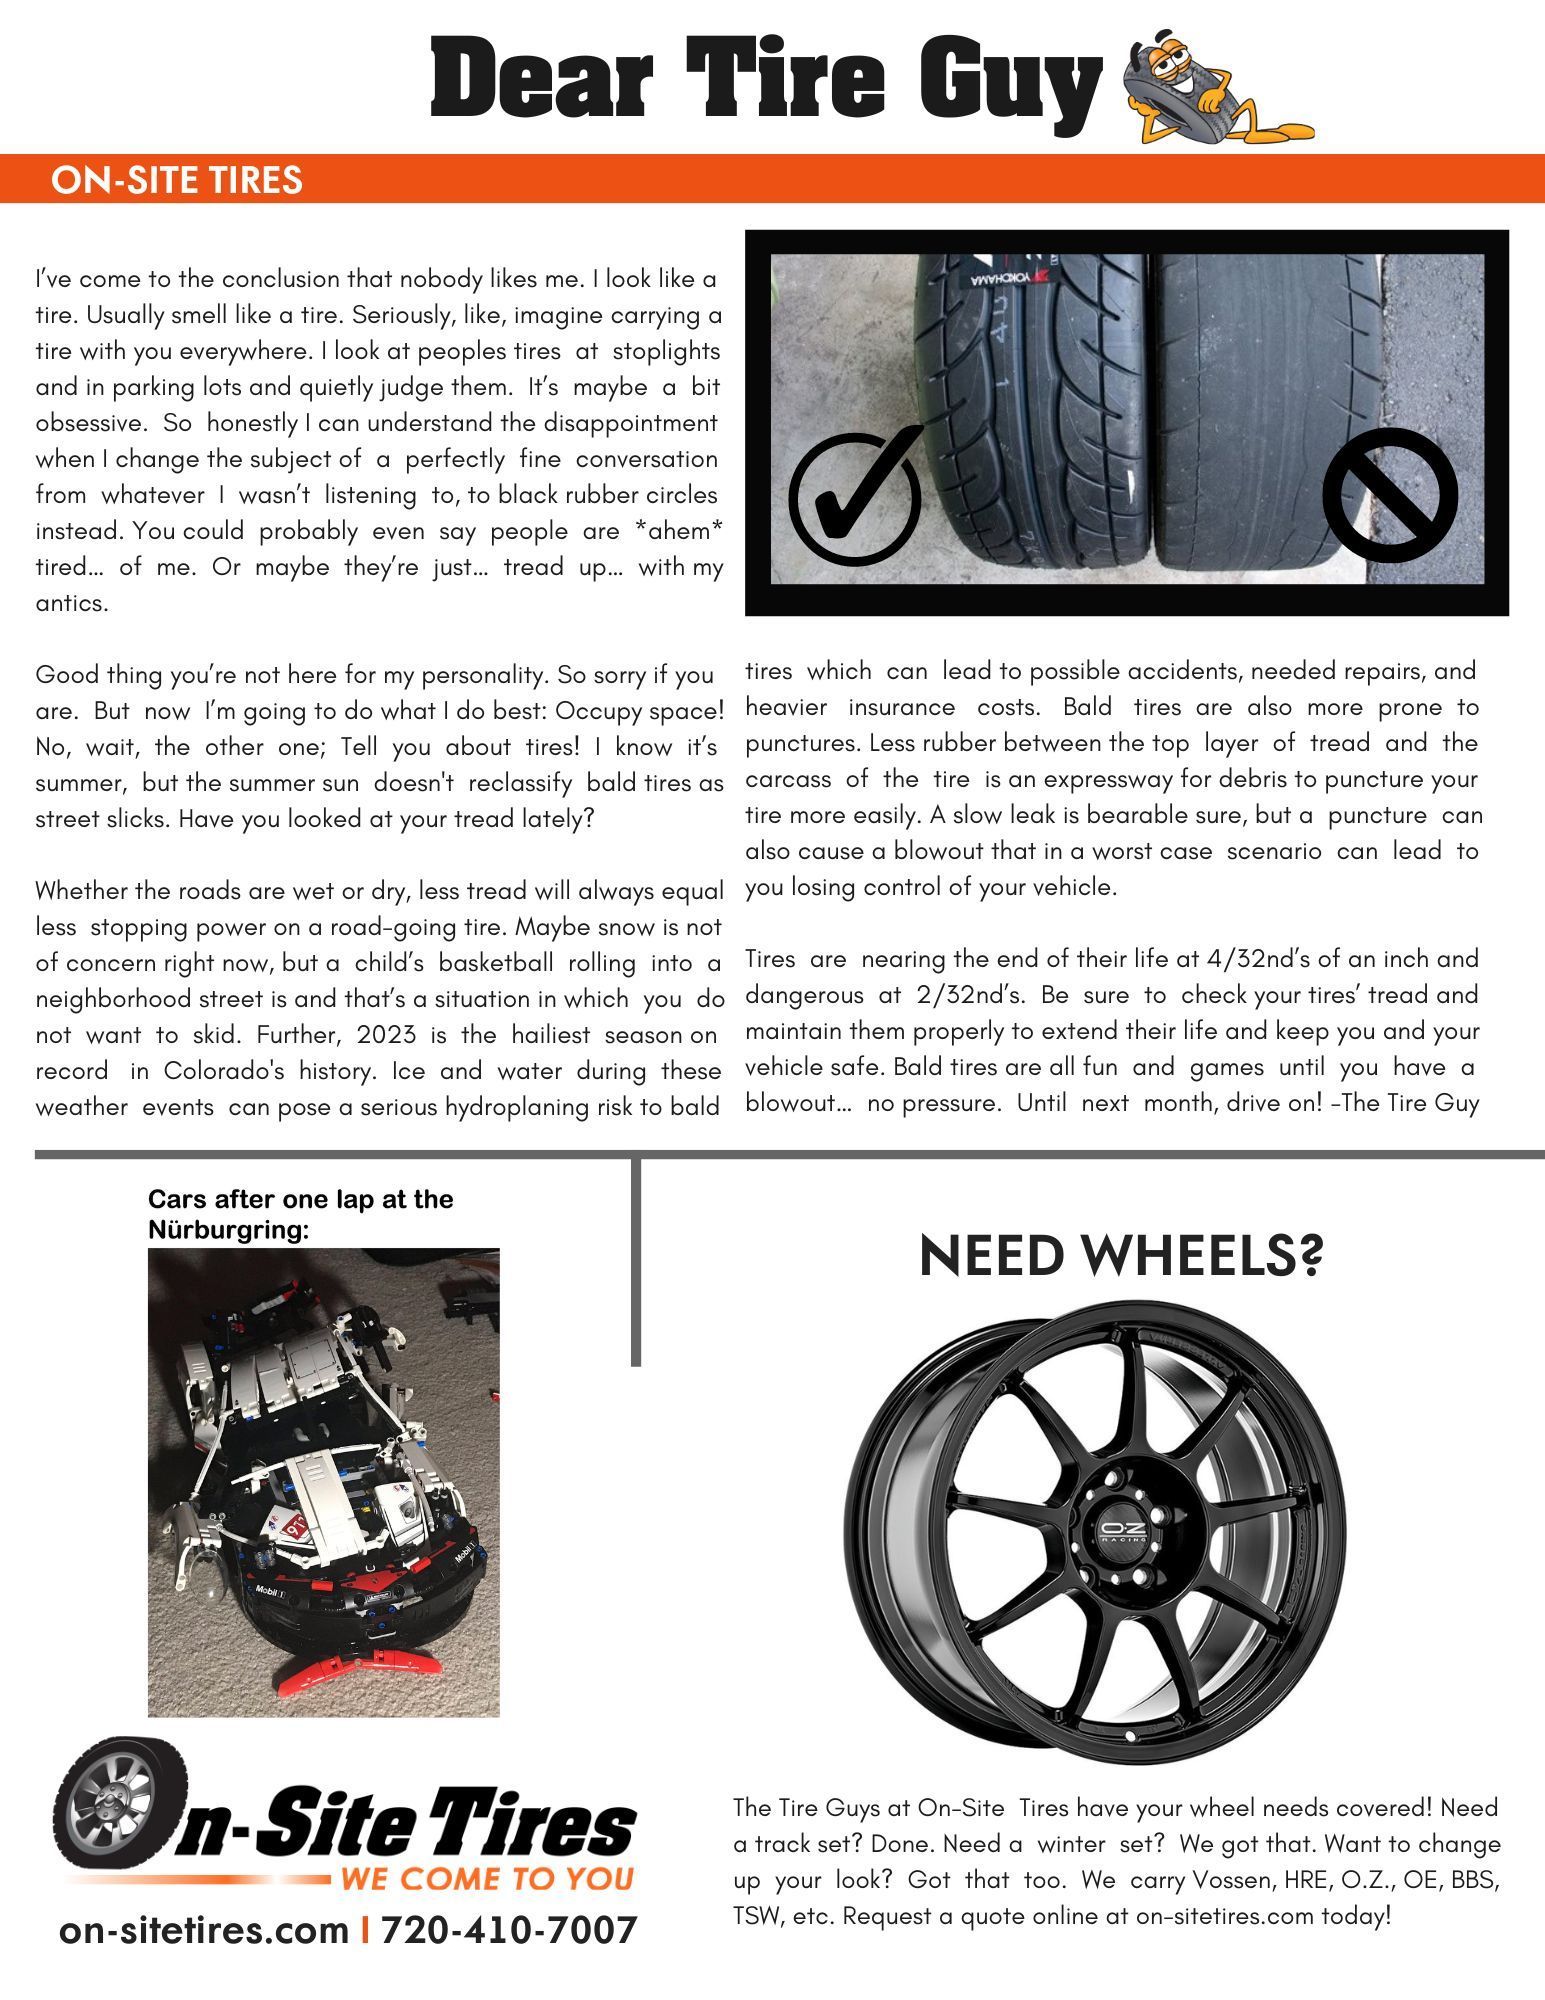 Article | On-Site Mobile Tire Store in Denver, CO